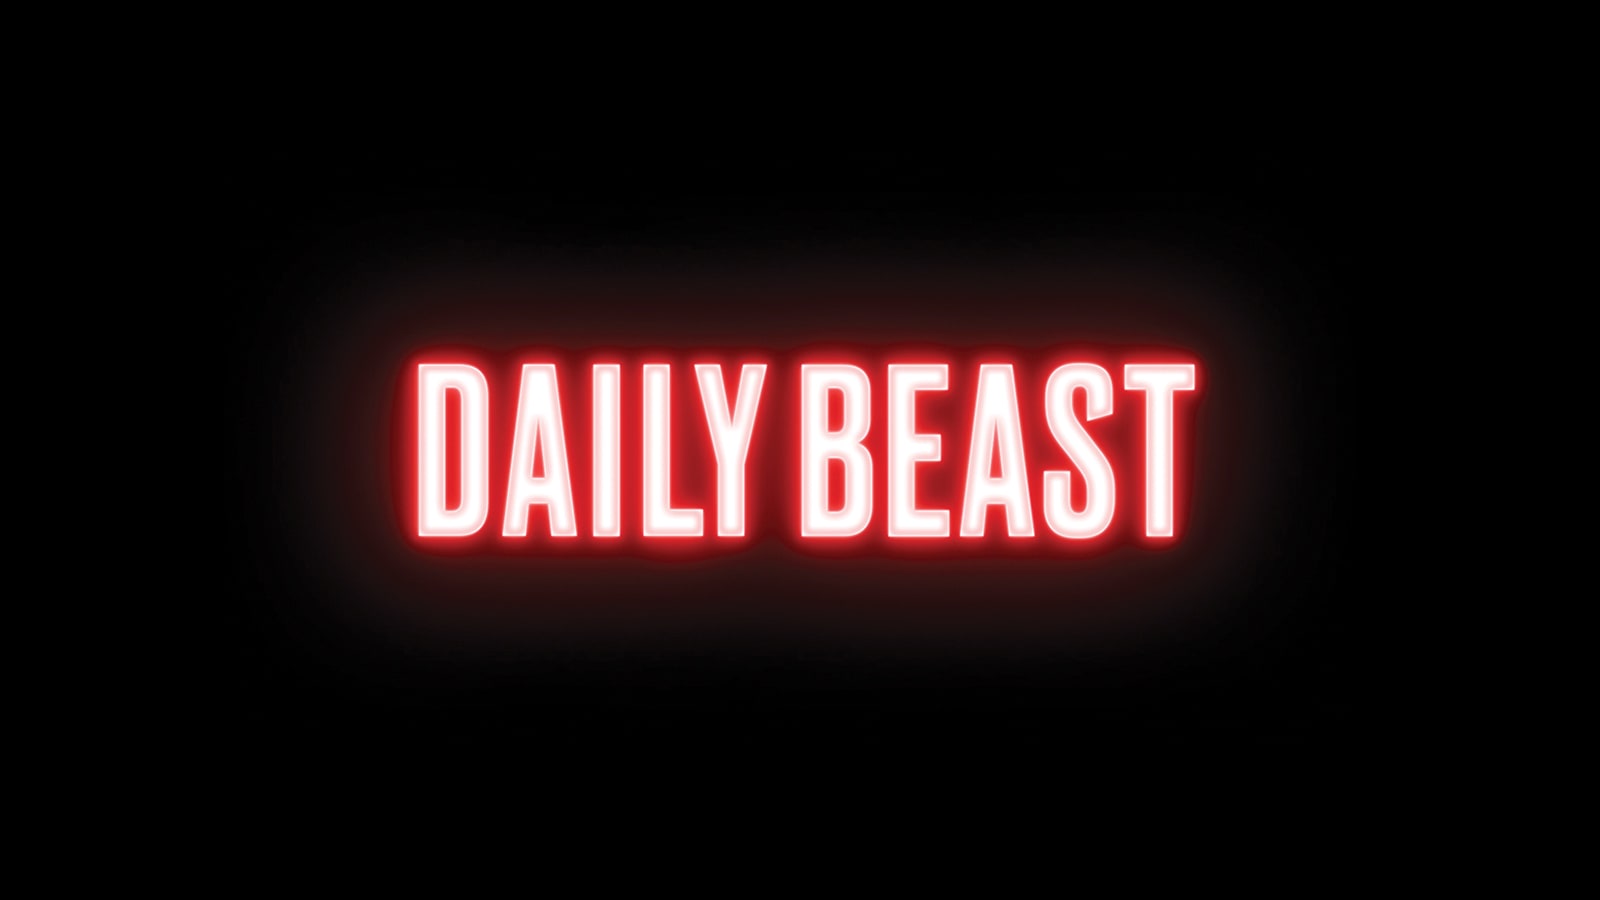 John Avlon Leaves Daily Beast To Join CNN Full-Time, Noah Shachtman Takes Over As Editor-In-Chief